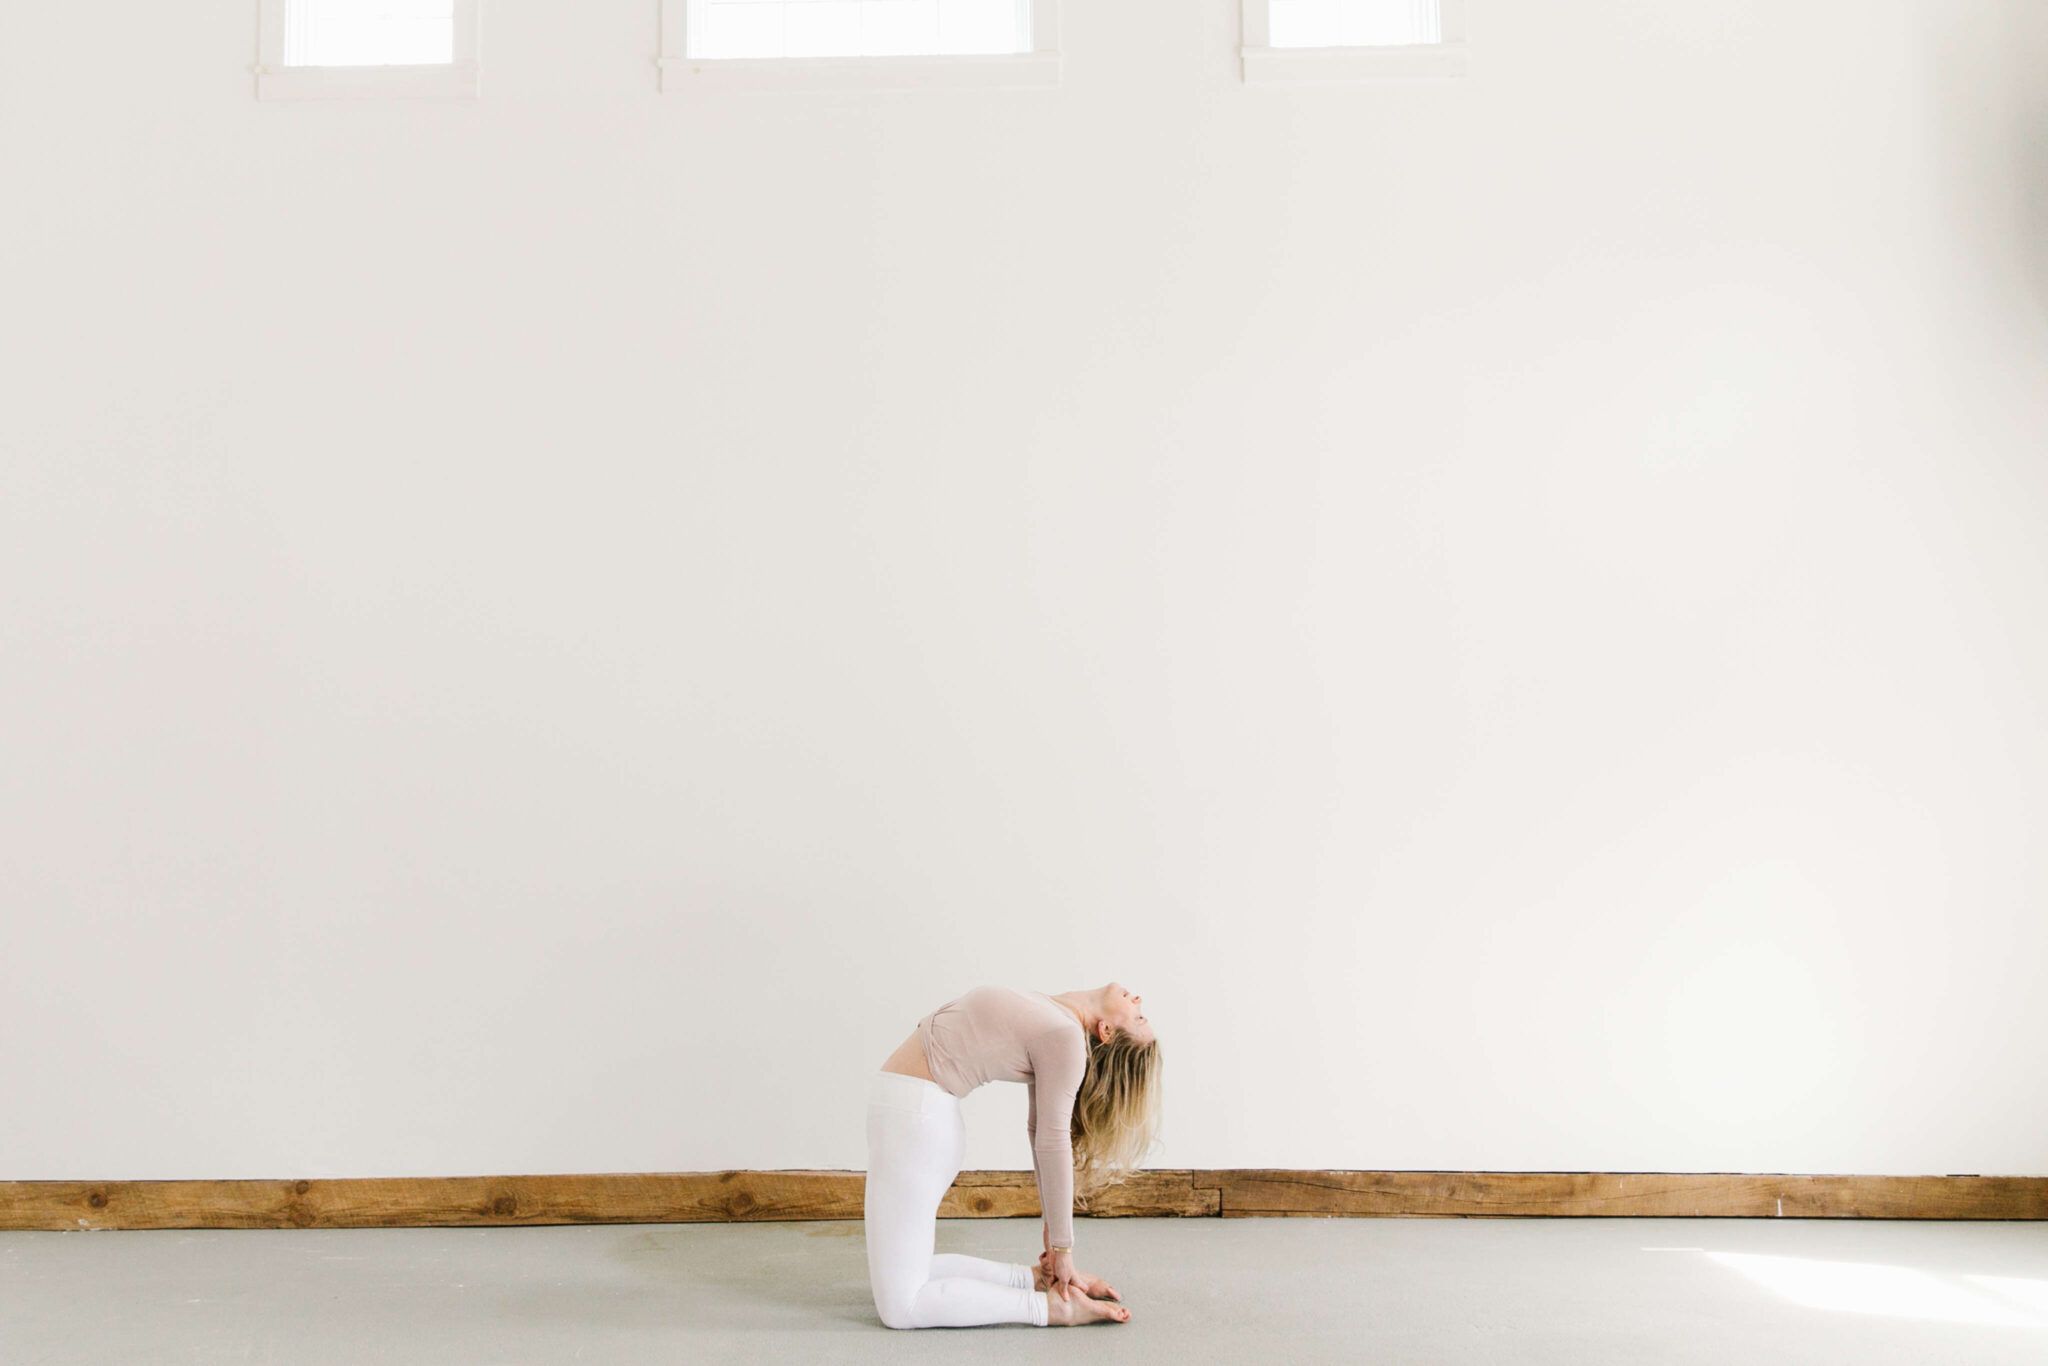 woman doing yoga pose backbend in white pants and rose colored top in large space with concrete floors, wood molding and white walls with three windows at top